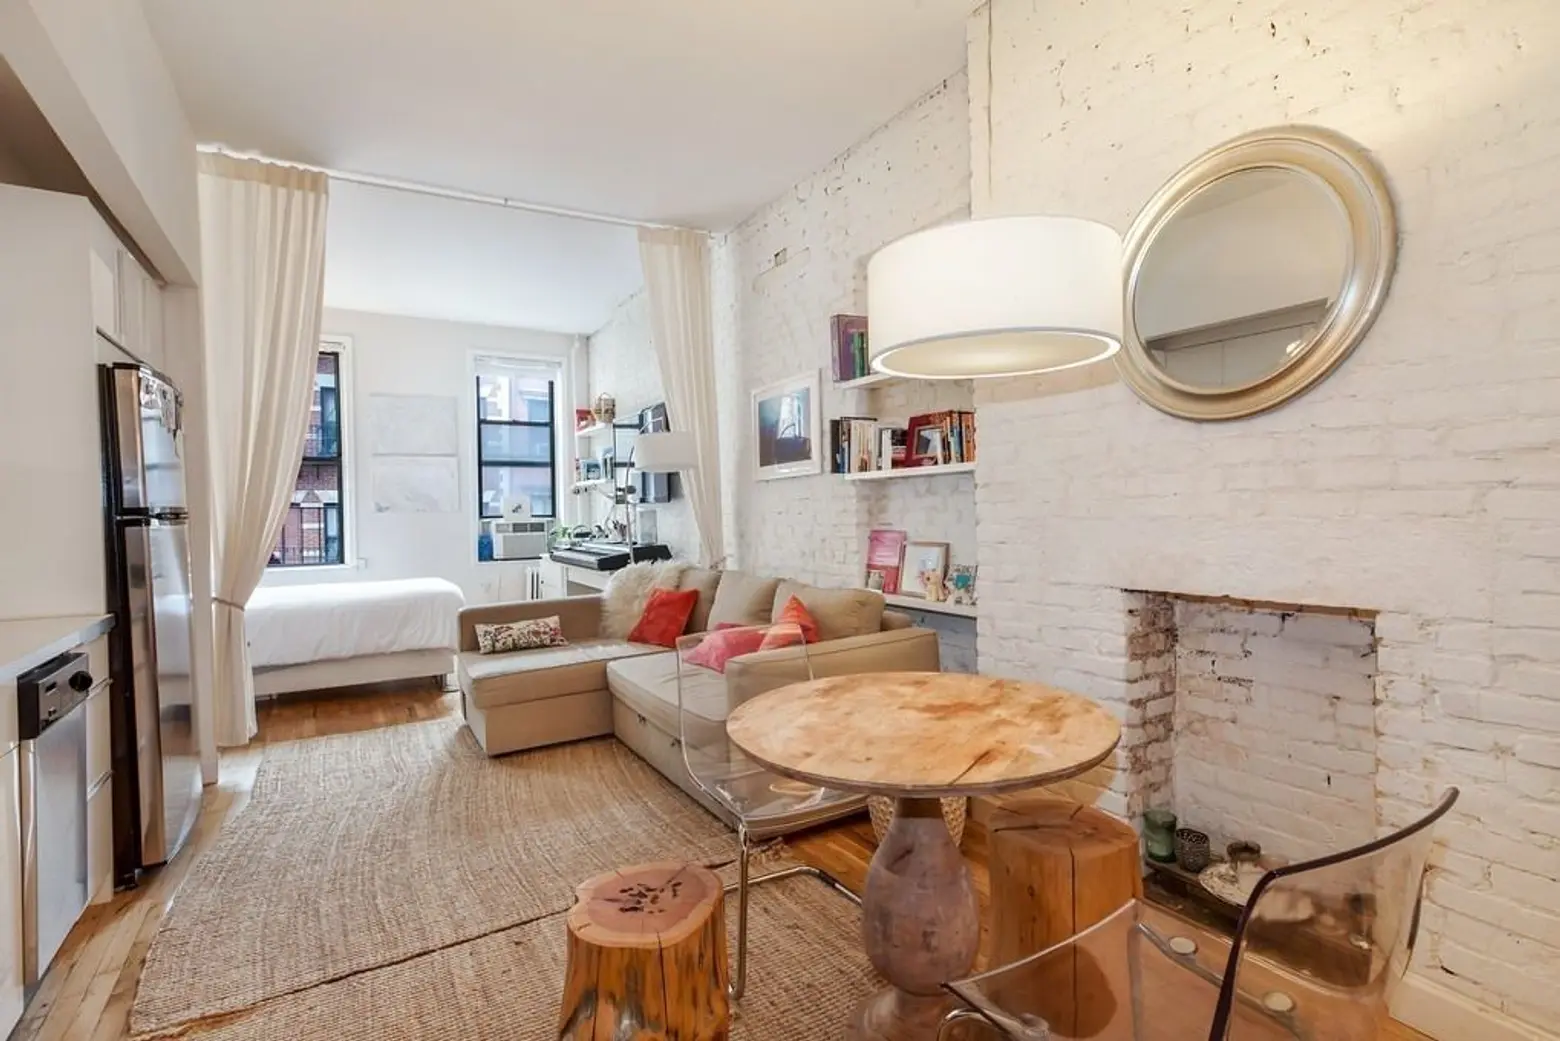 This white and bright studio asks $549K in Soho